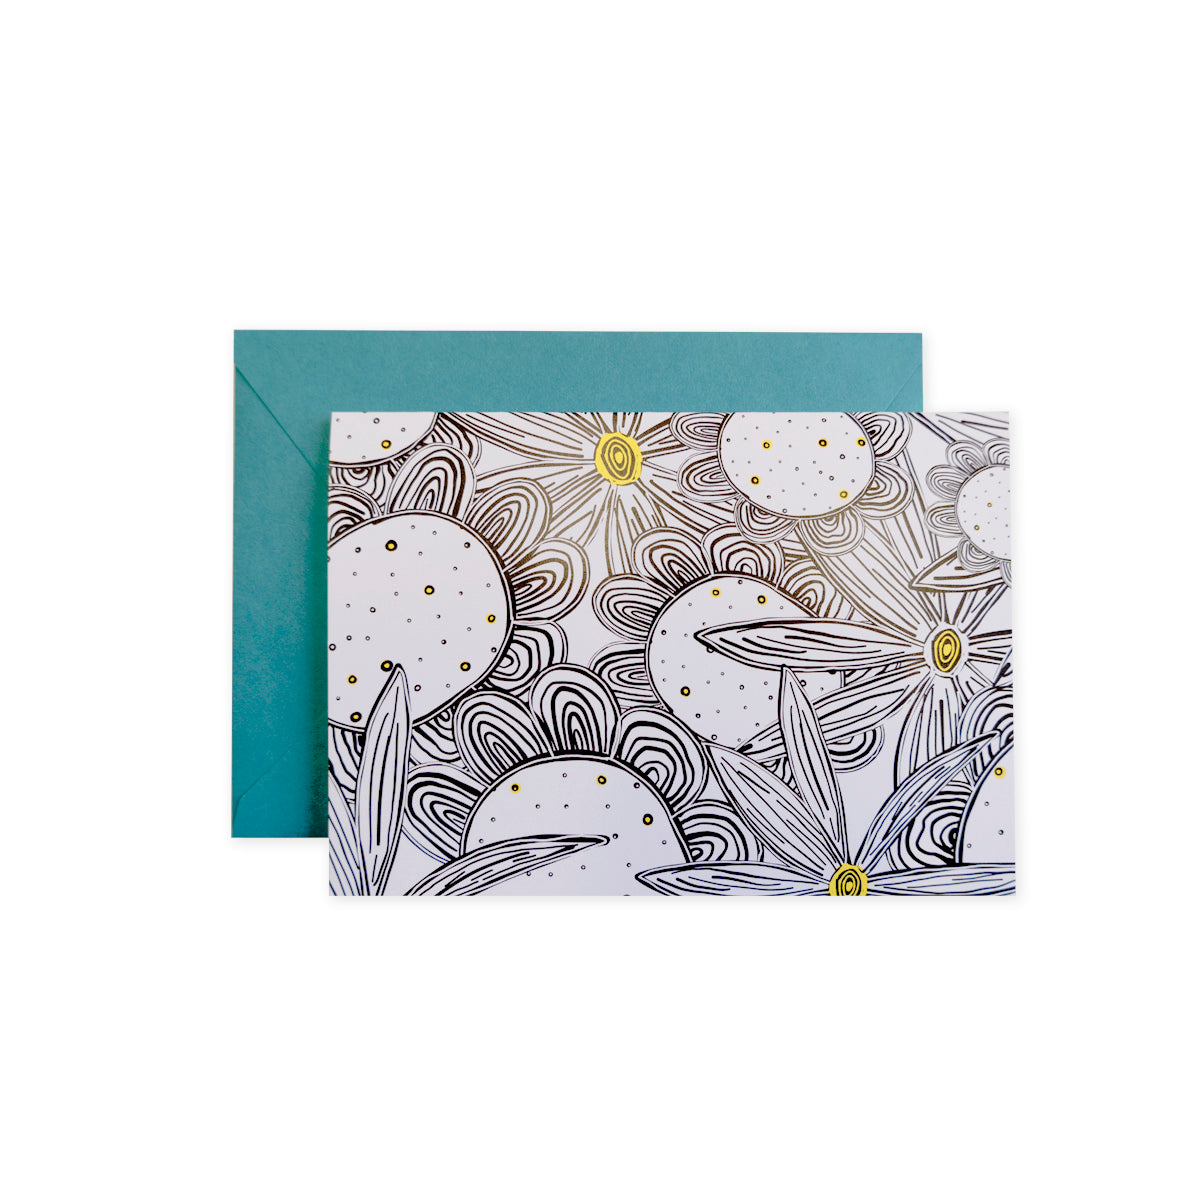 4 1/2" x 6 1/4" greeting card with high contract black and white flower line art pattern, hand illustrated